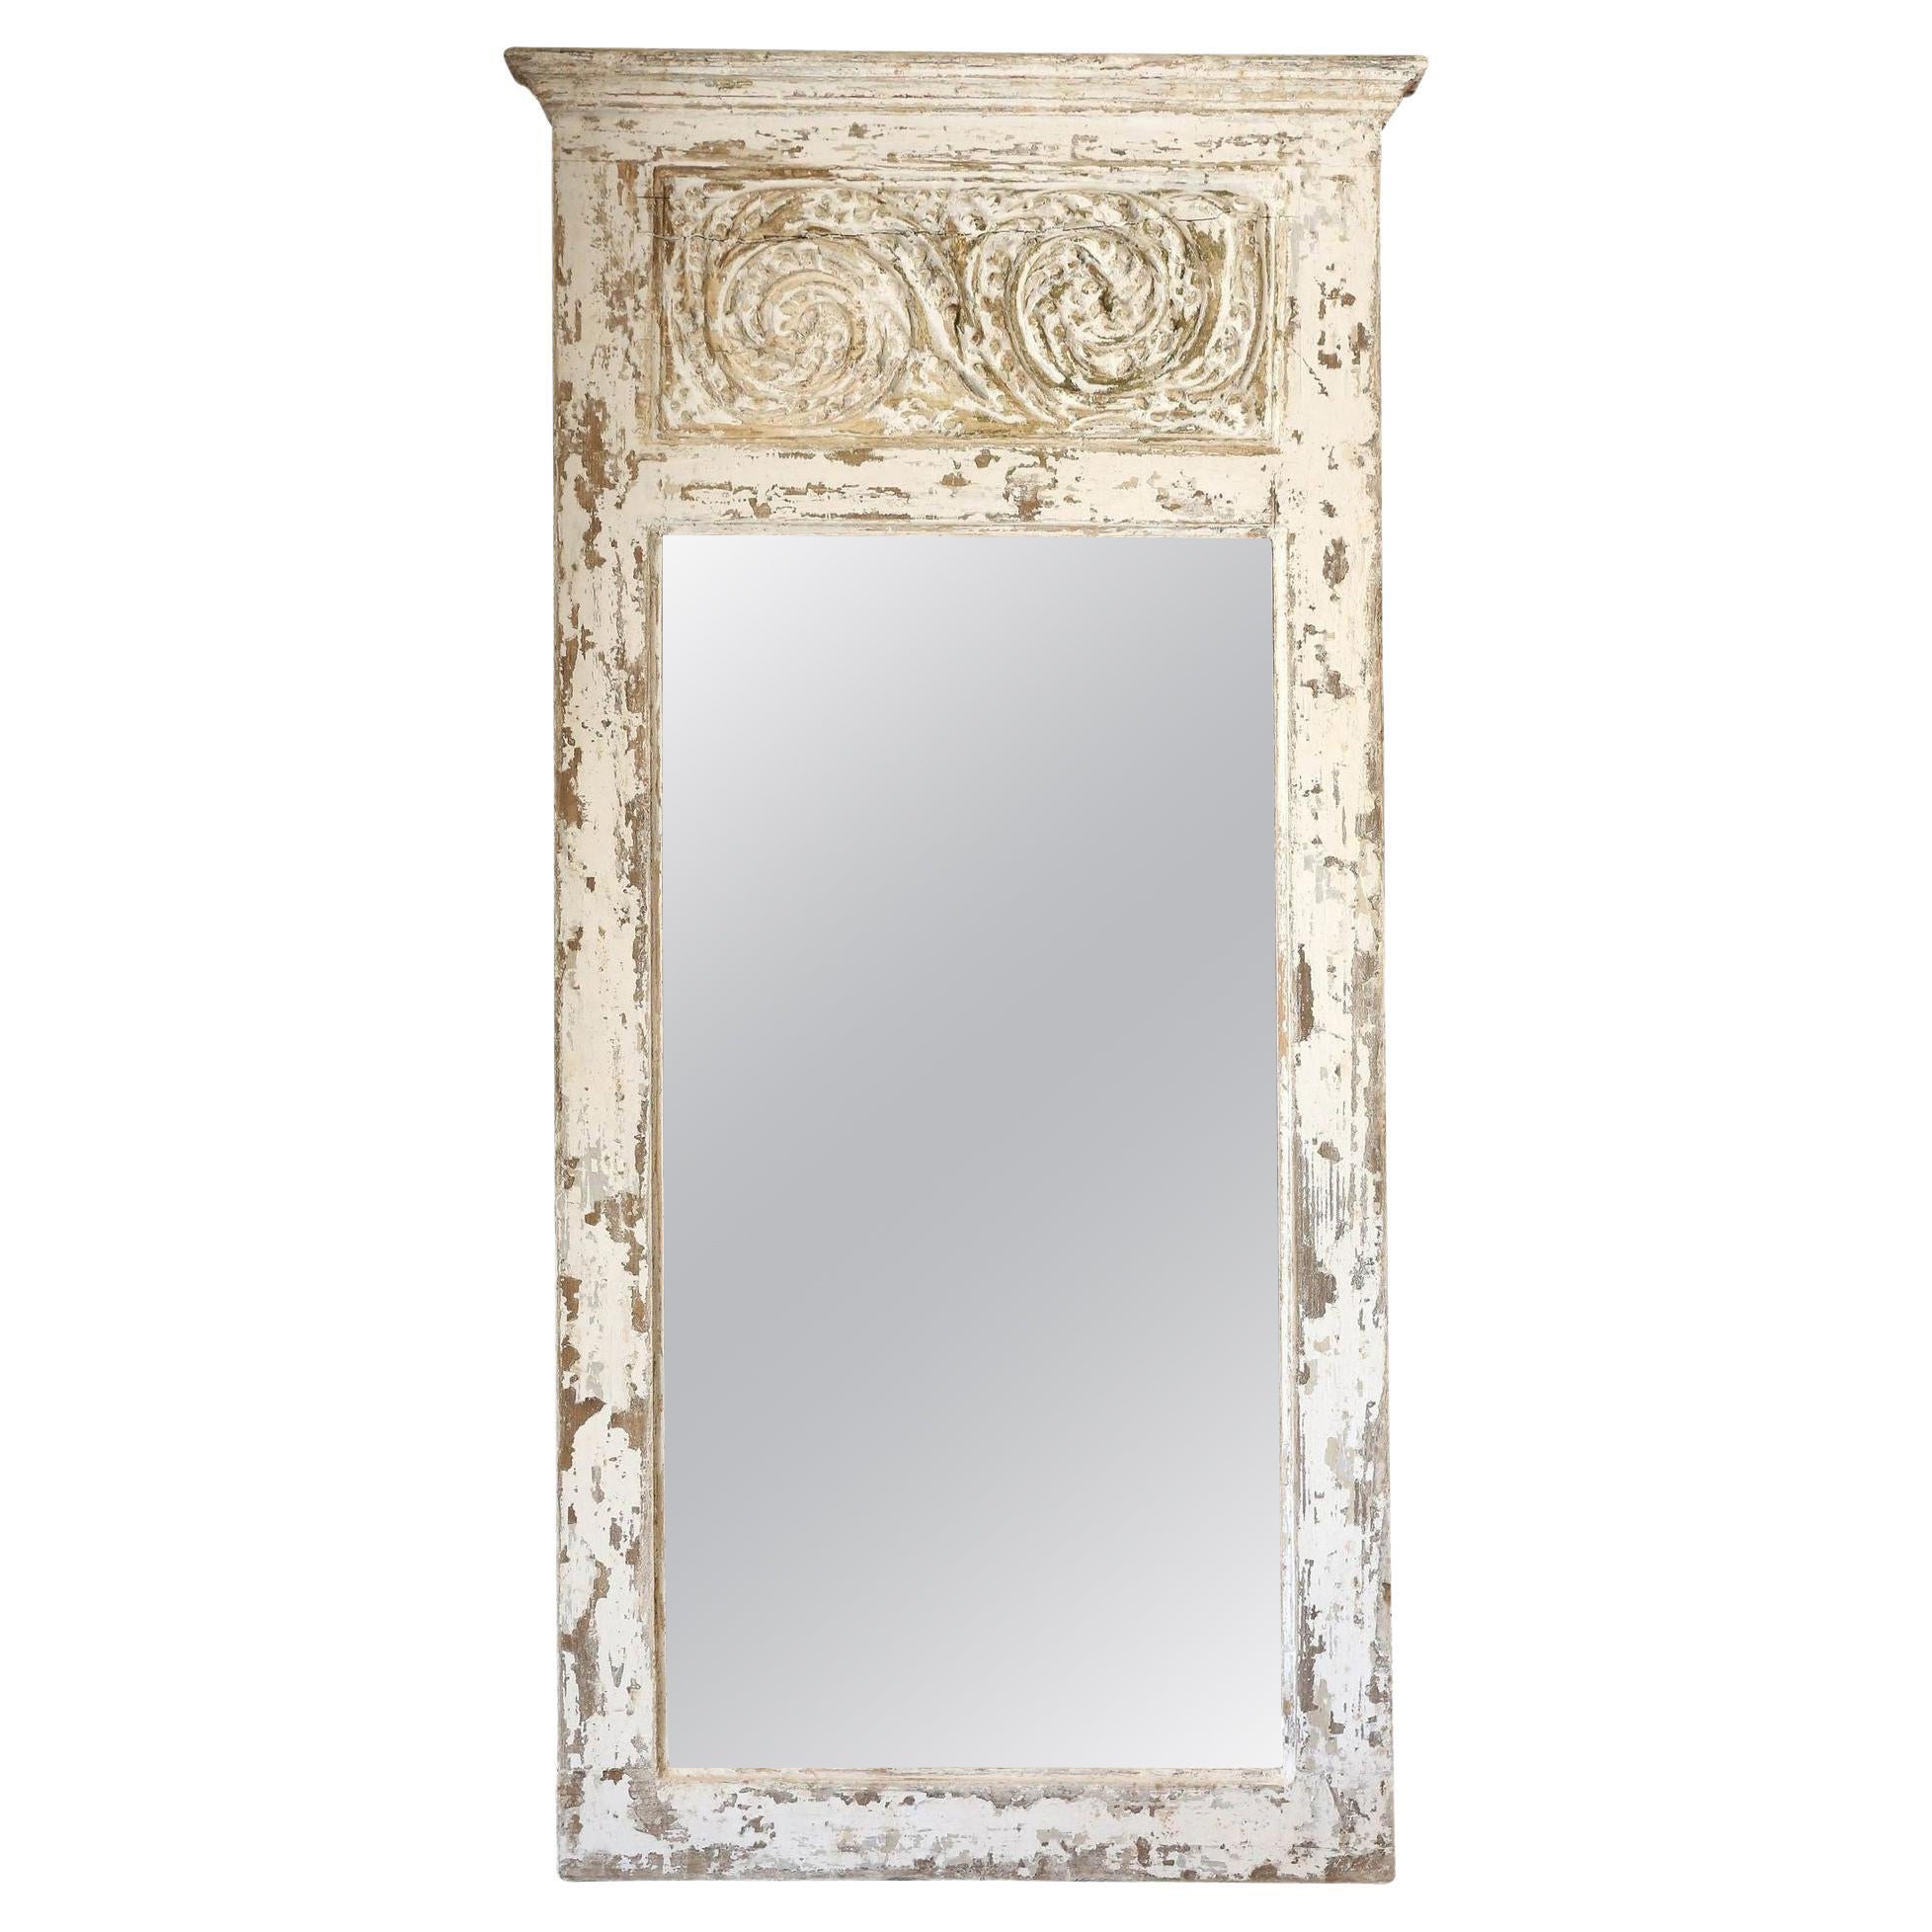 Painted Trumeau Mirror